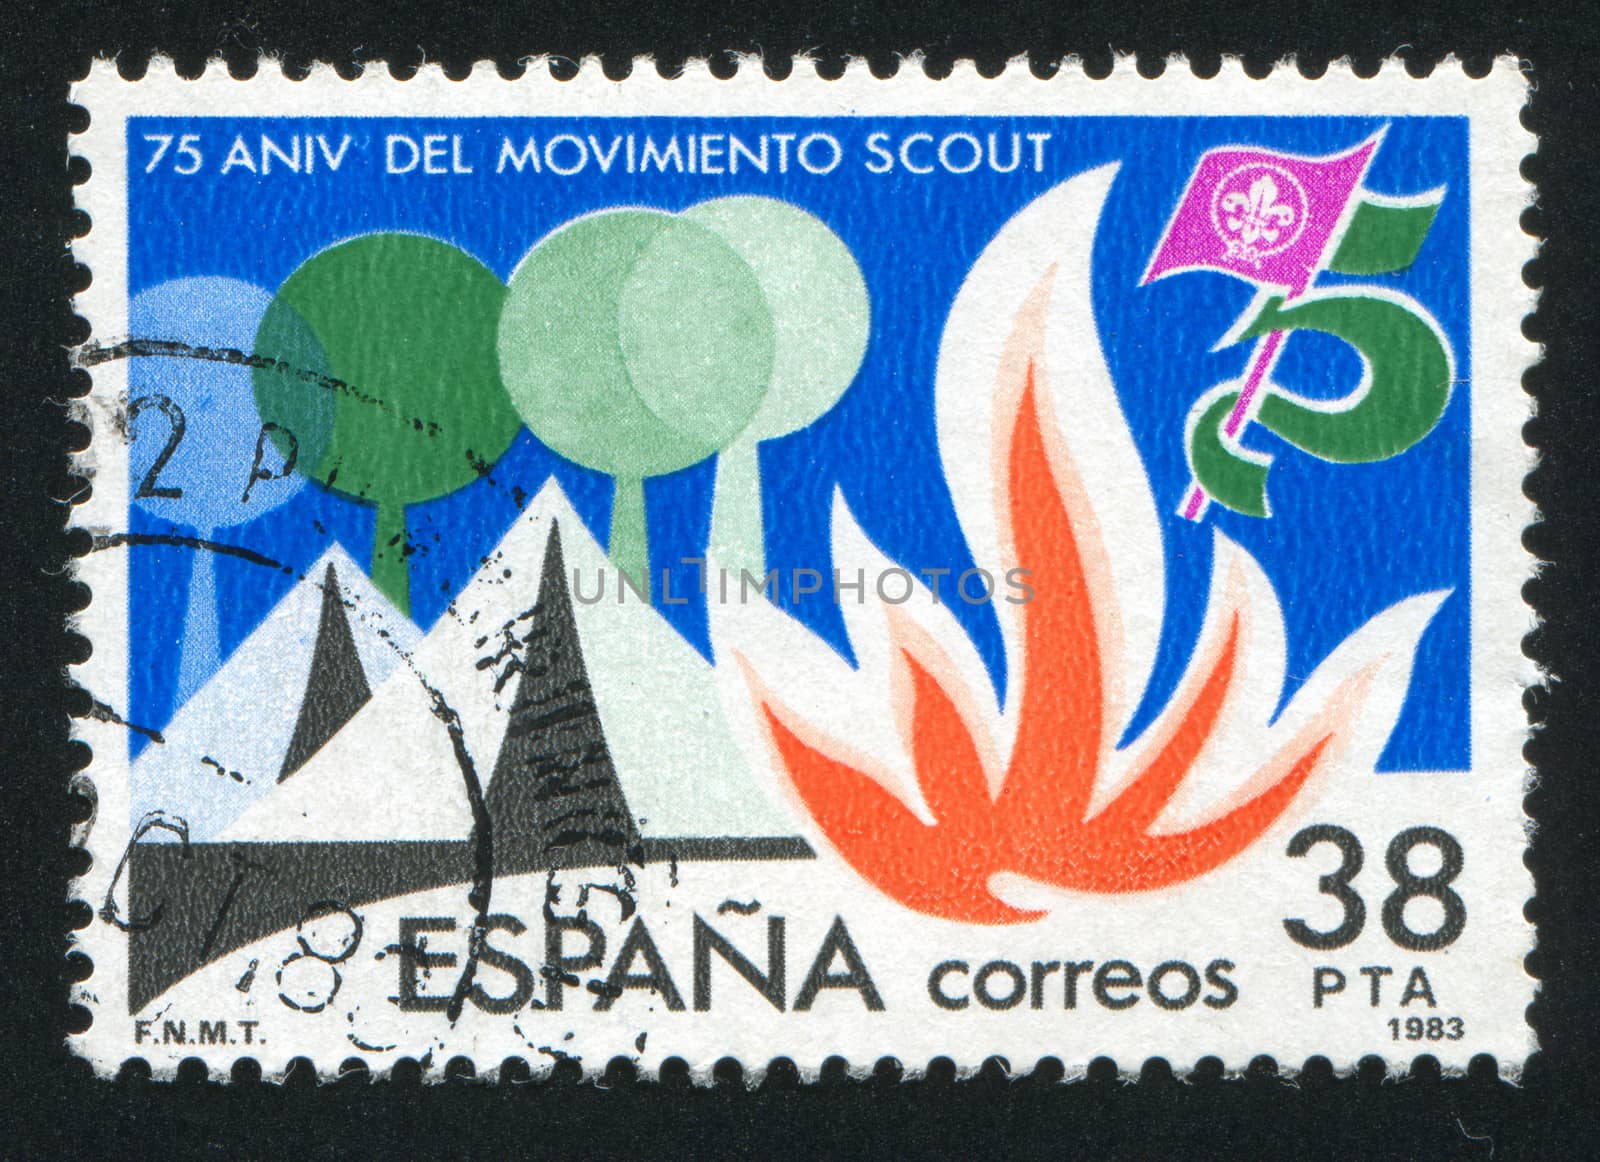 SPAIN - CIRCA 1983: stamp printed by Spain, shows Scouting, circa 1983